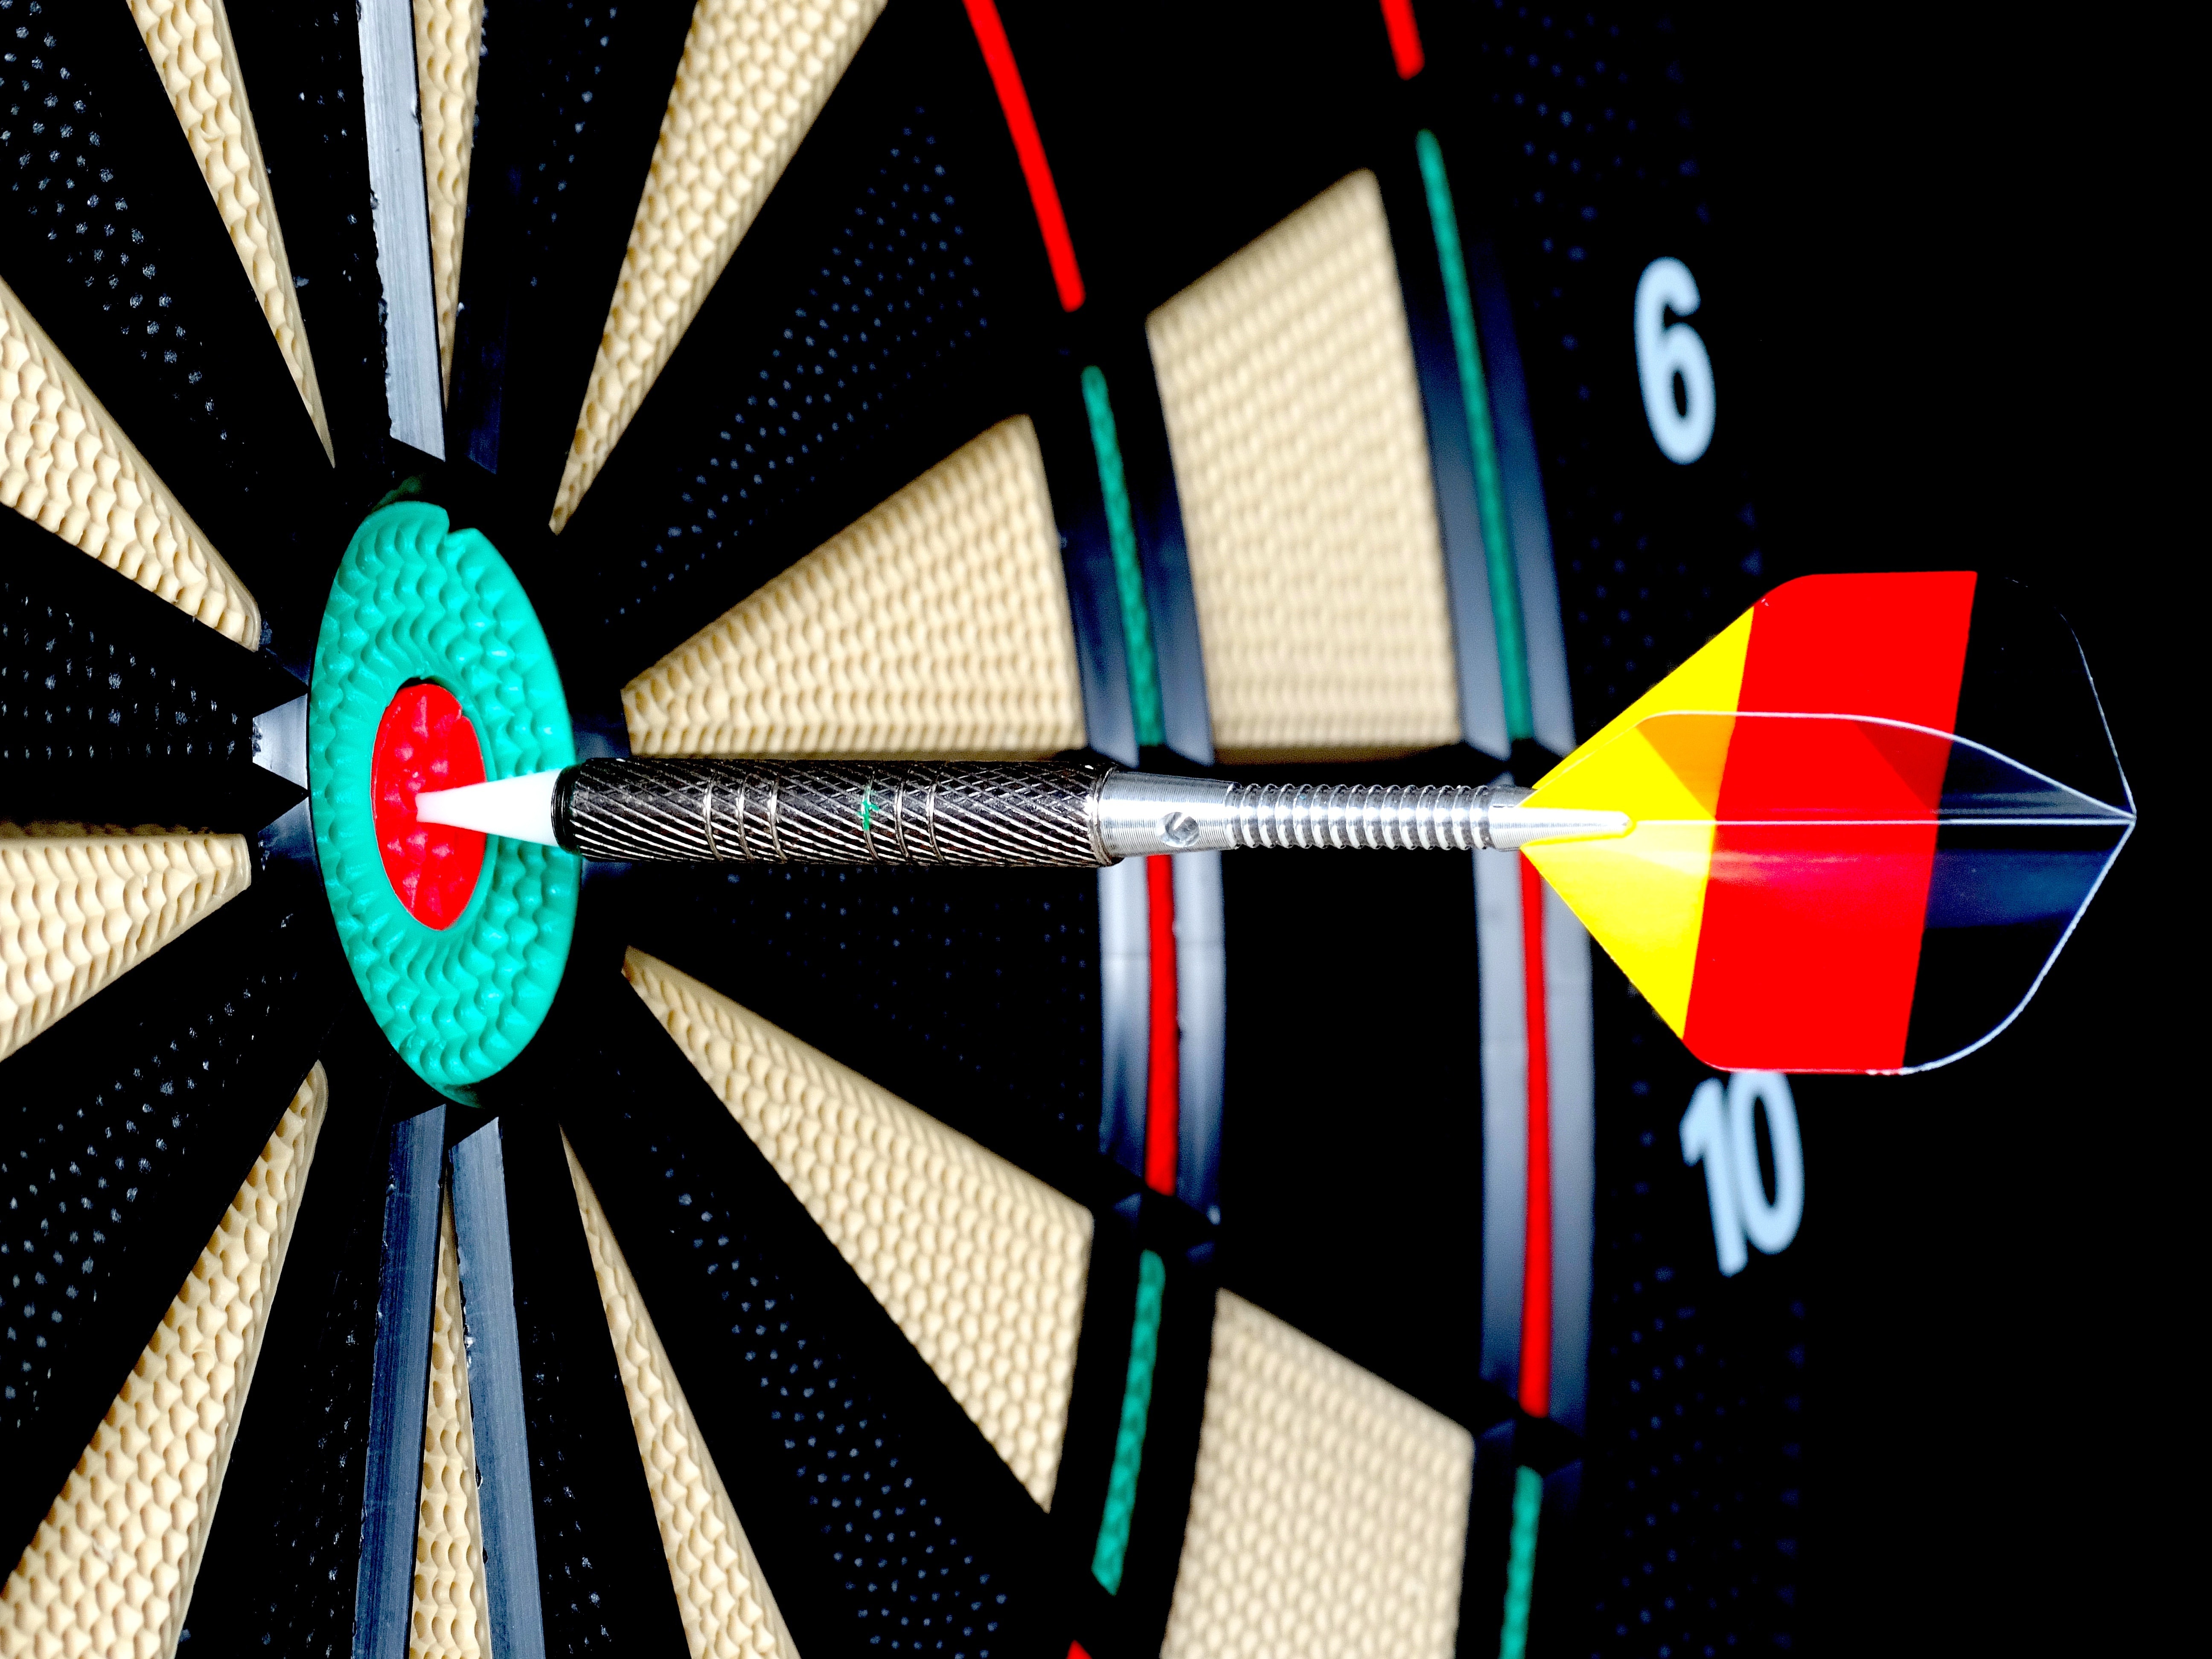 yellow, red and black dart marked on the bull's eye target of dart board